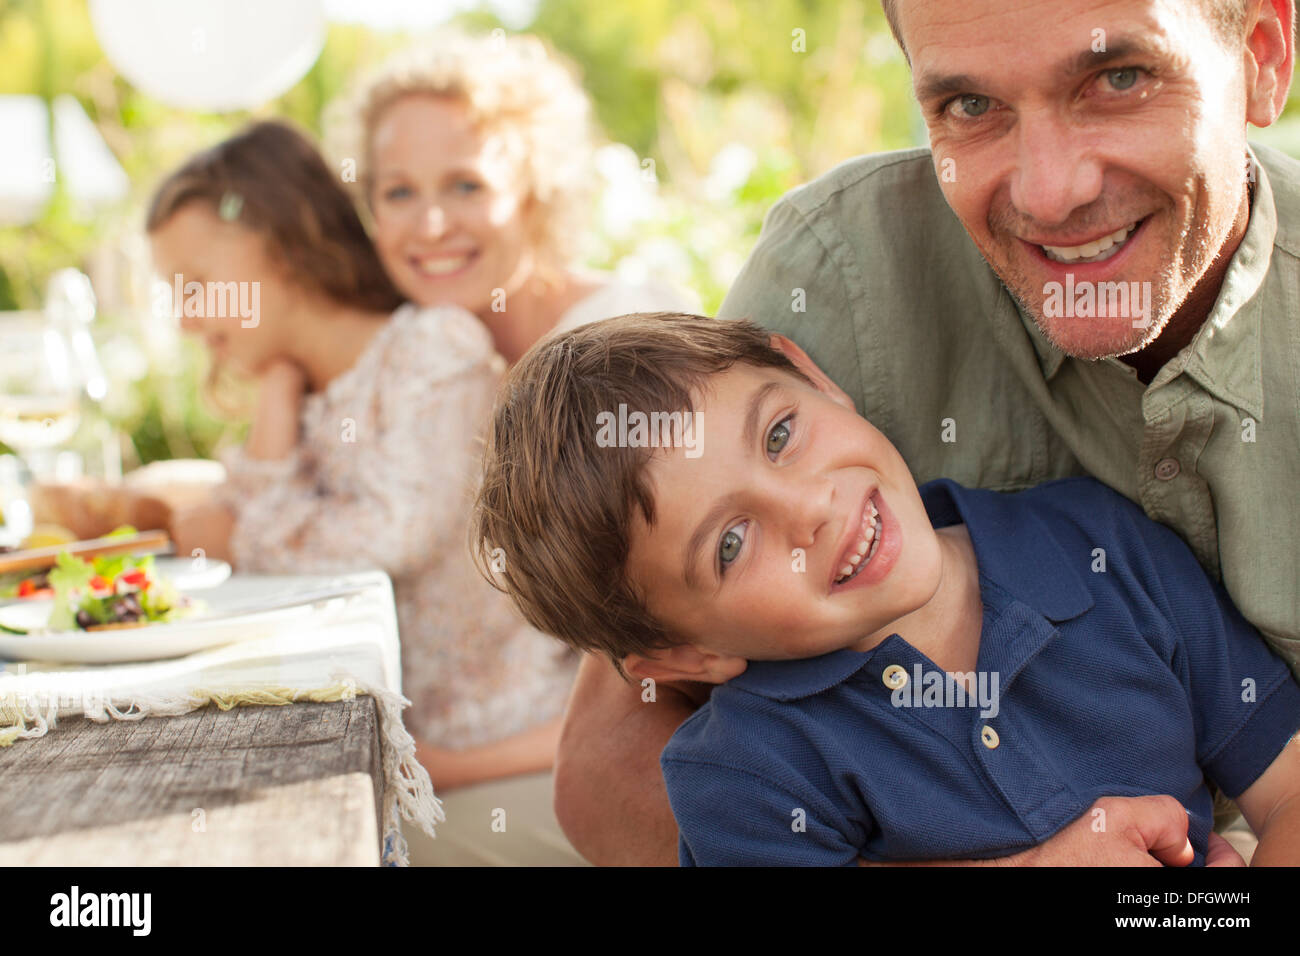 Portrait of smiling father and son Stock Photo